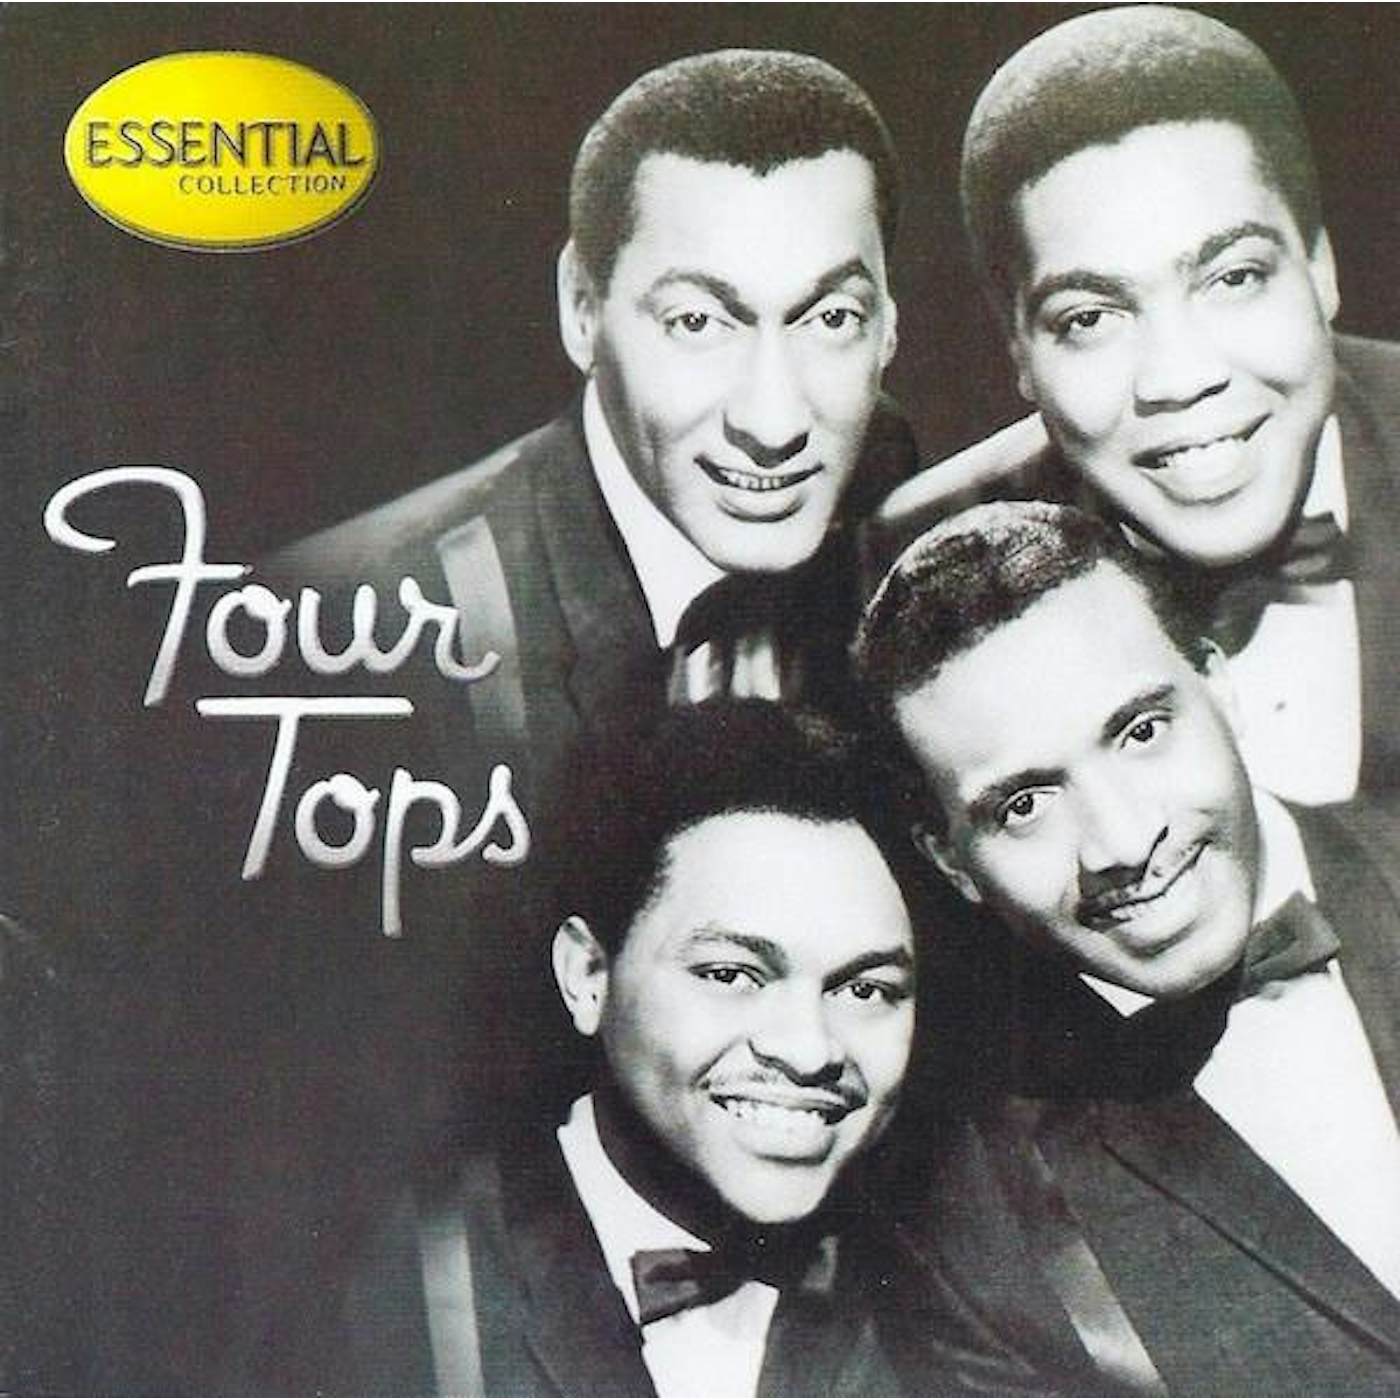 Four Tops ESSENTIAL COLLECTION CD